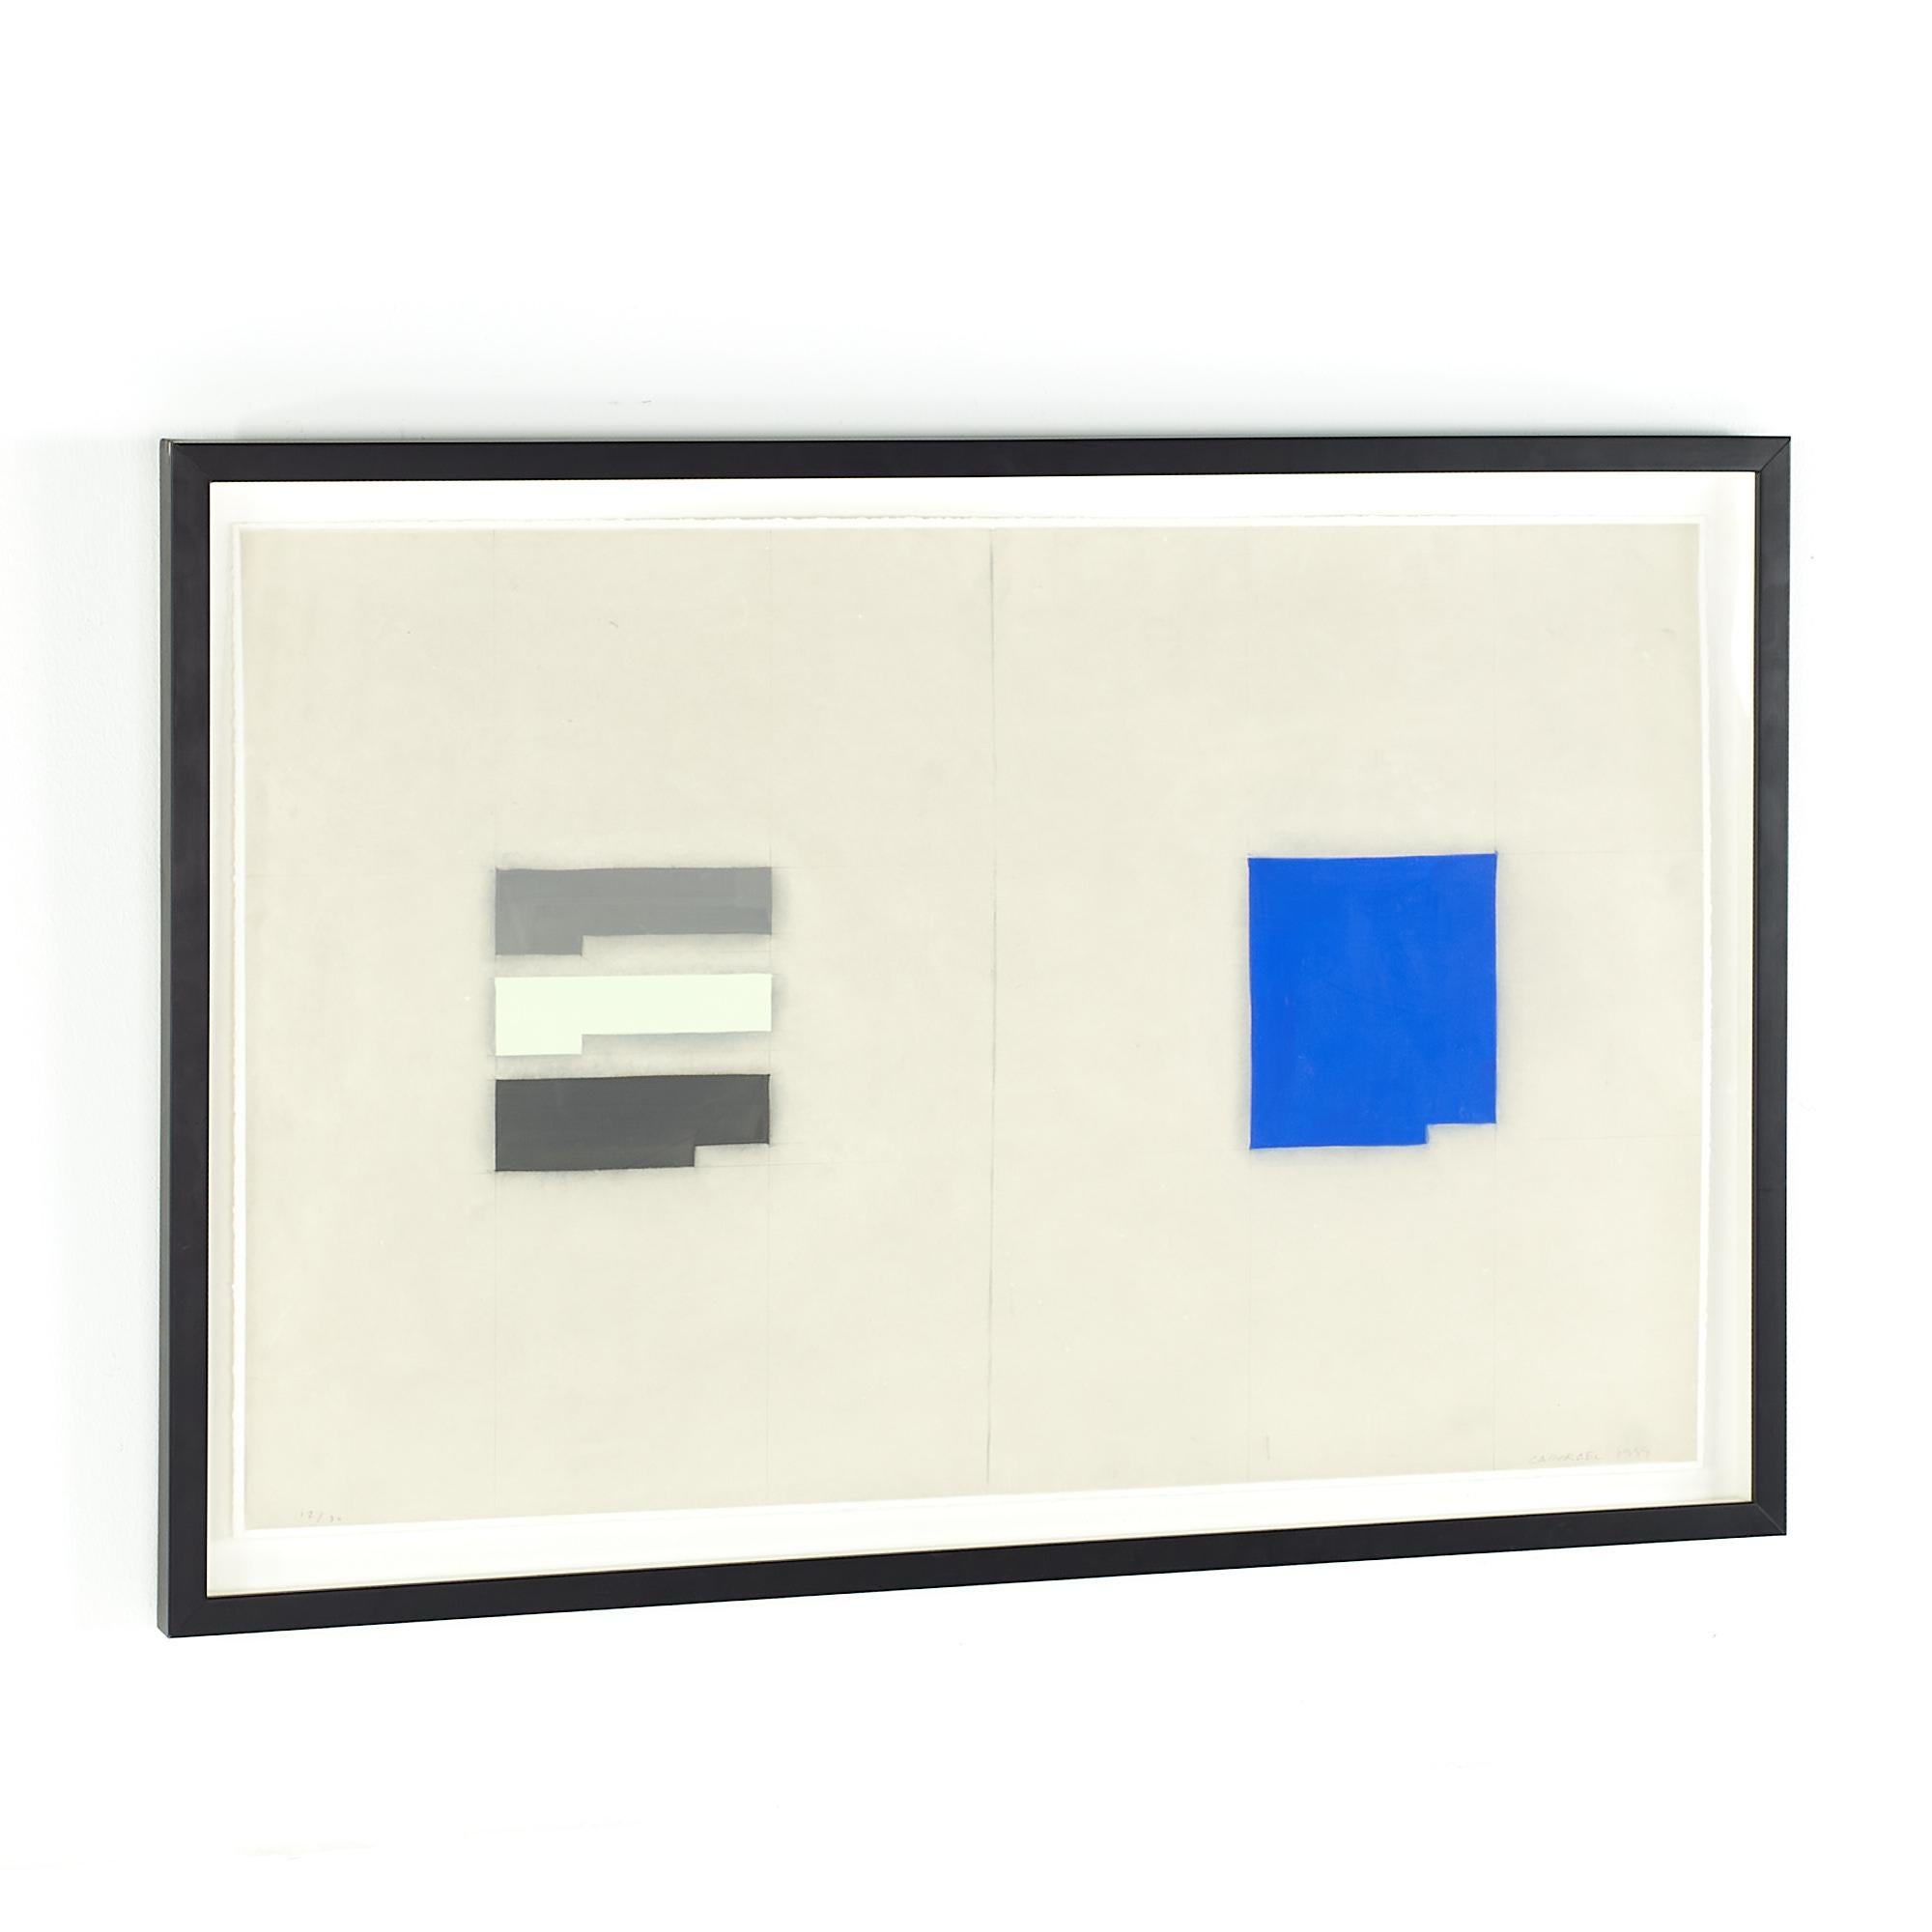 Suzanne Caporael Mid Century Elements of Pigment Etching with Gouache and Pencil

This artwork measures: 34.5 wide x 1.25 deep x 23.25 inches high

We take our photos in a controlled lighting studio to show as much detail as possible. We do not